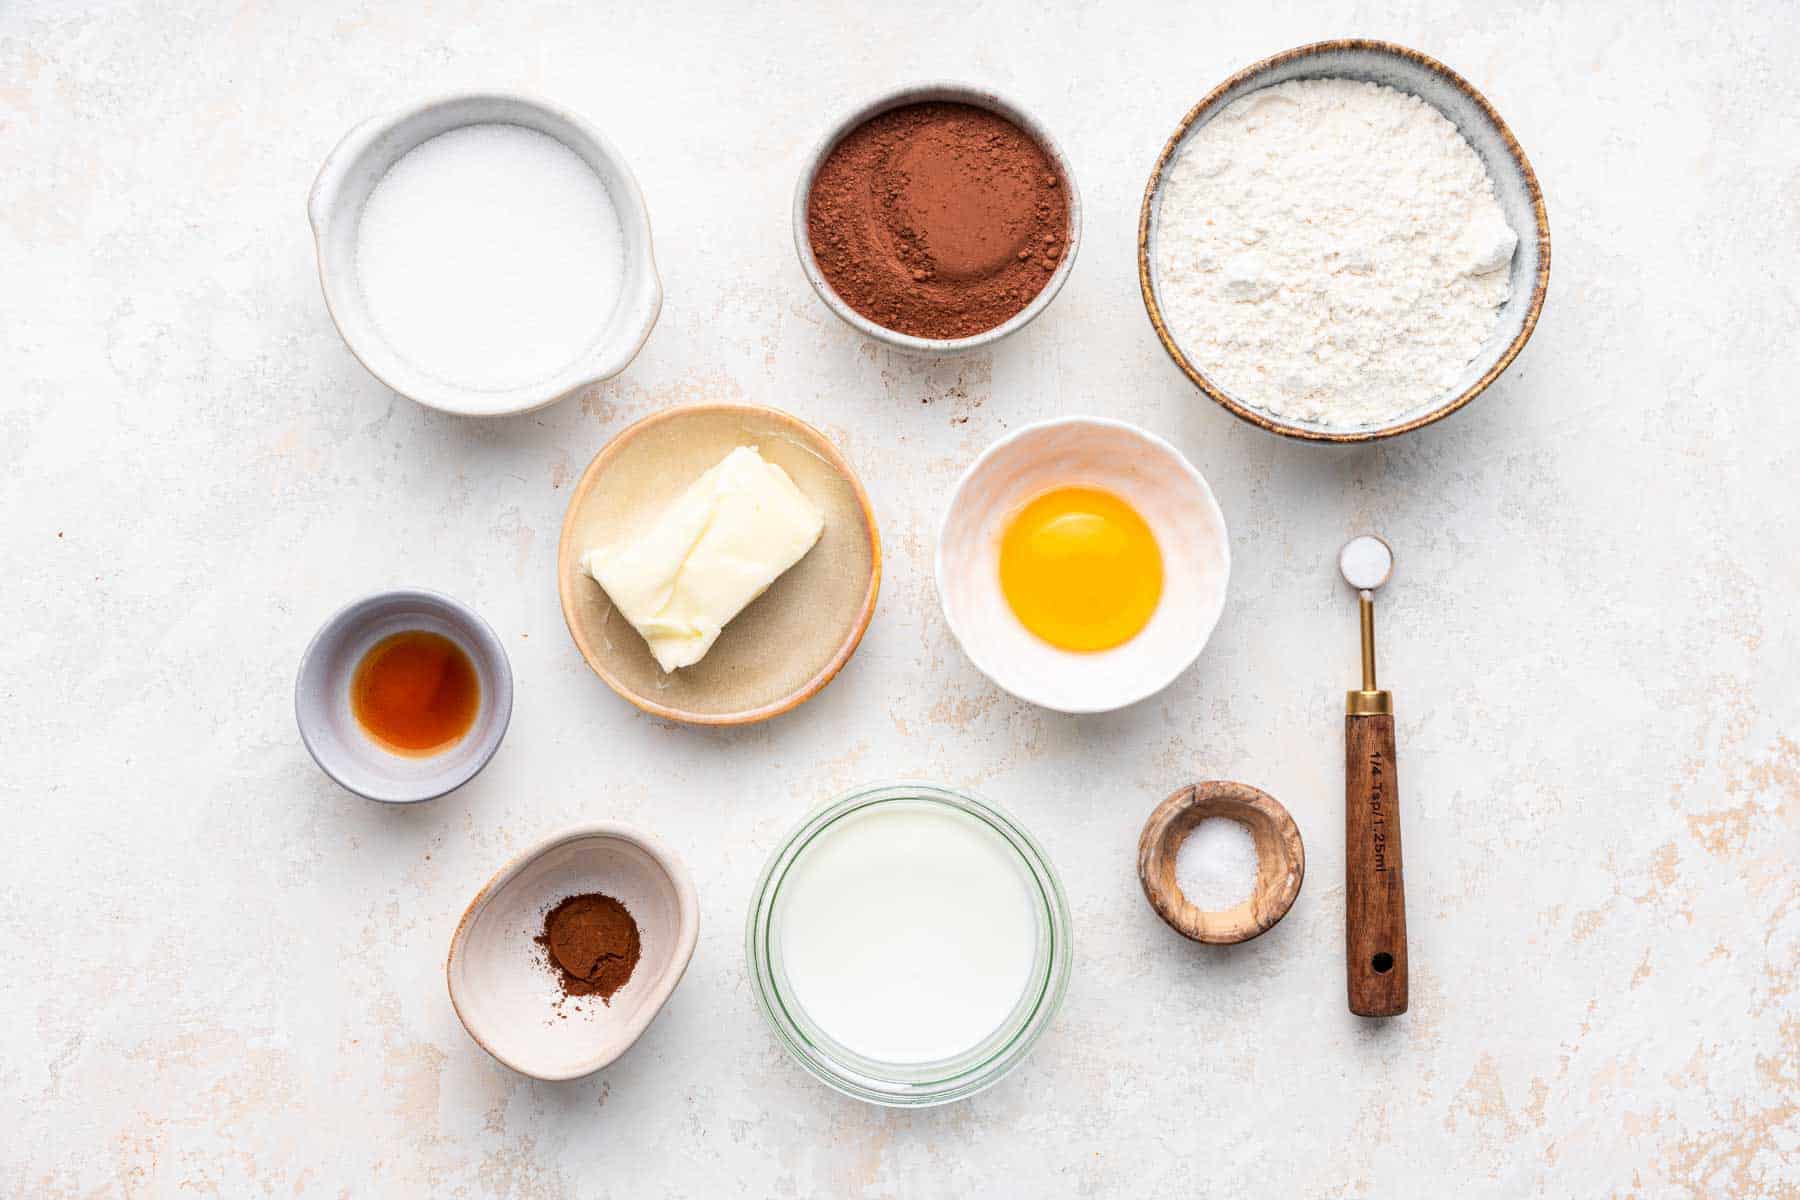 Small bowls of ingredients, including egg, cocoa powder, flour, and sugar on kitchen counter.